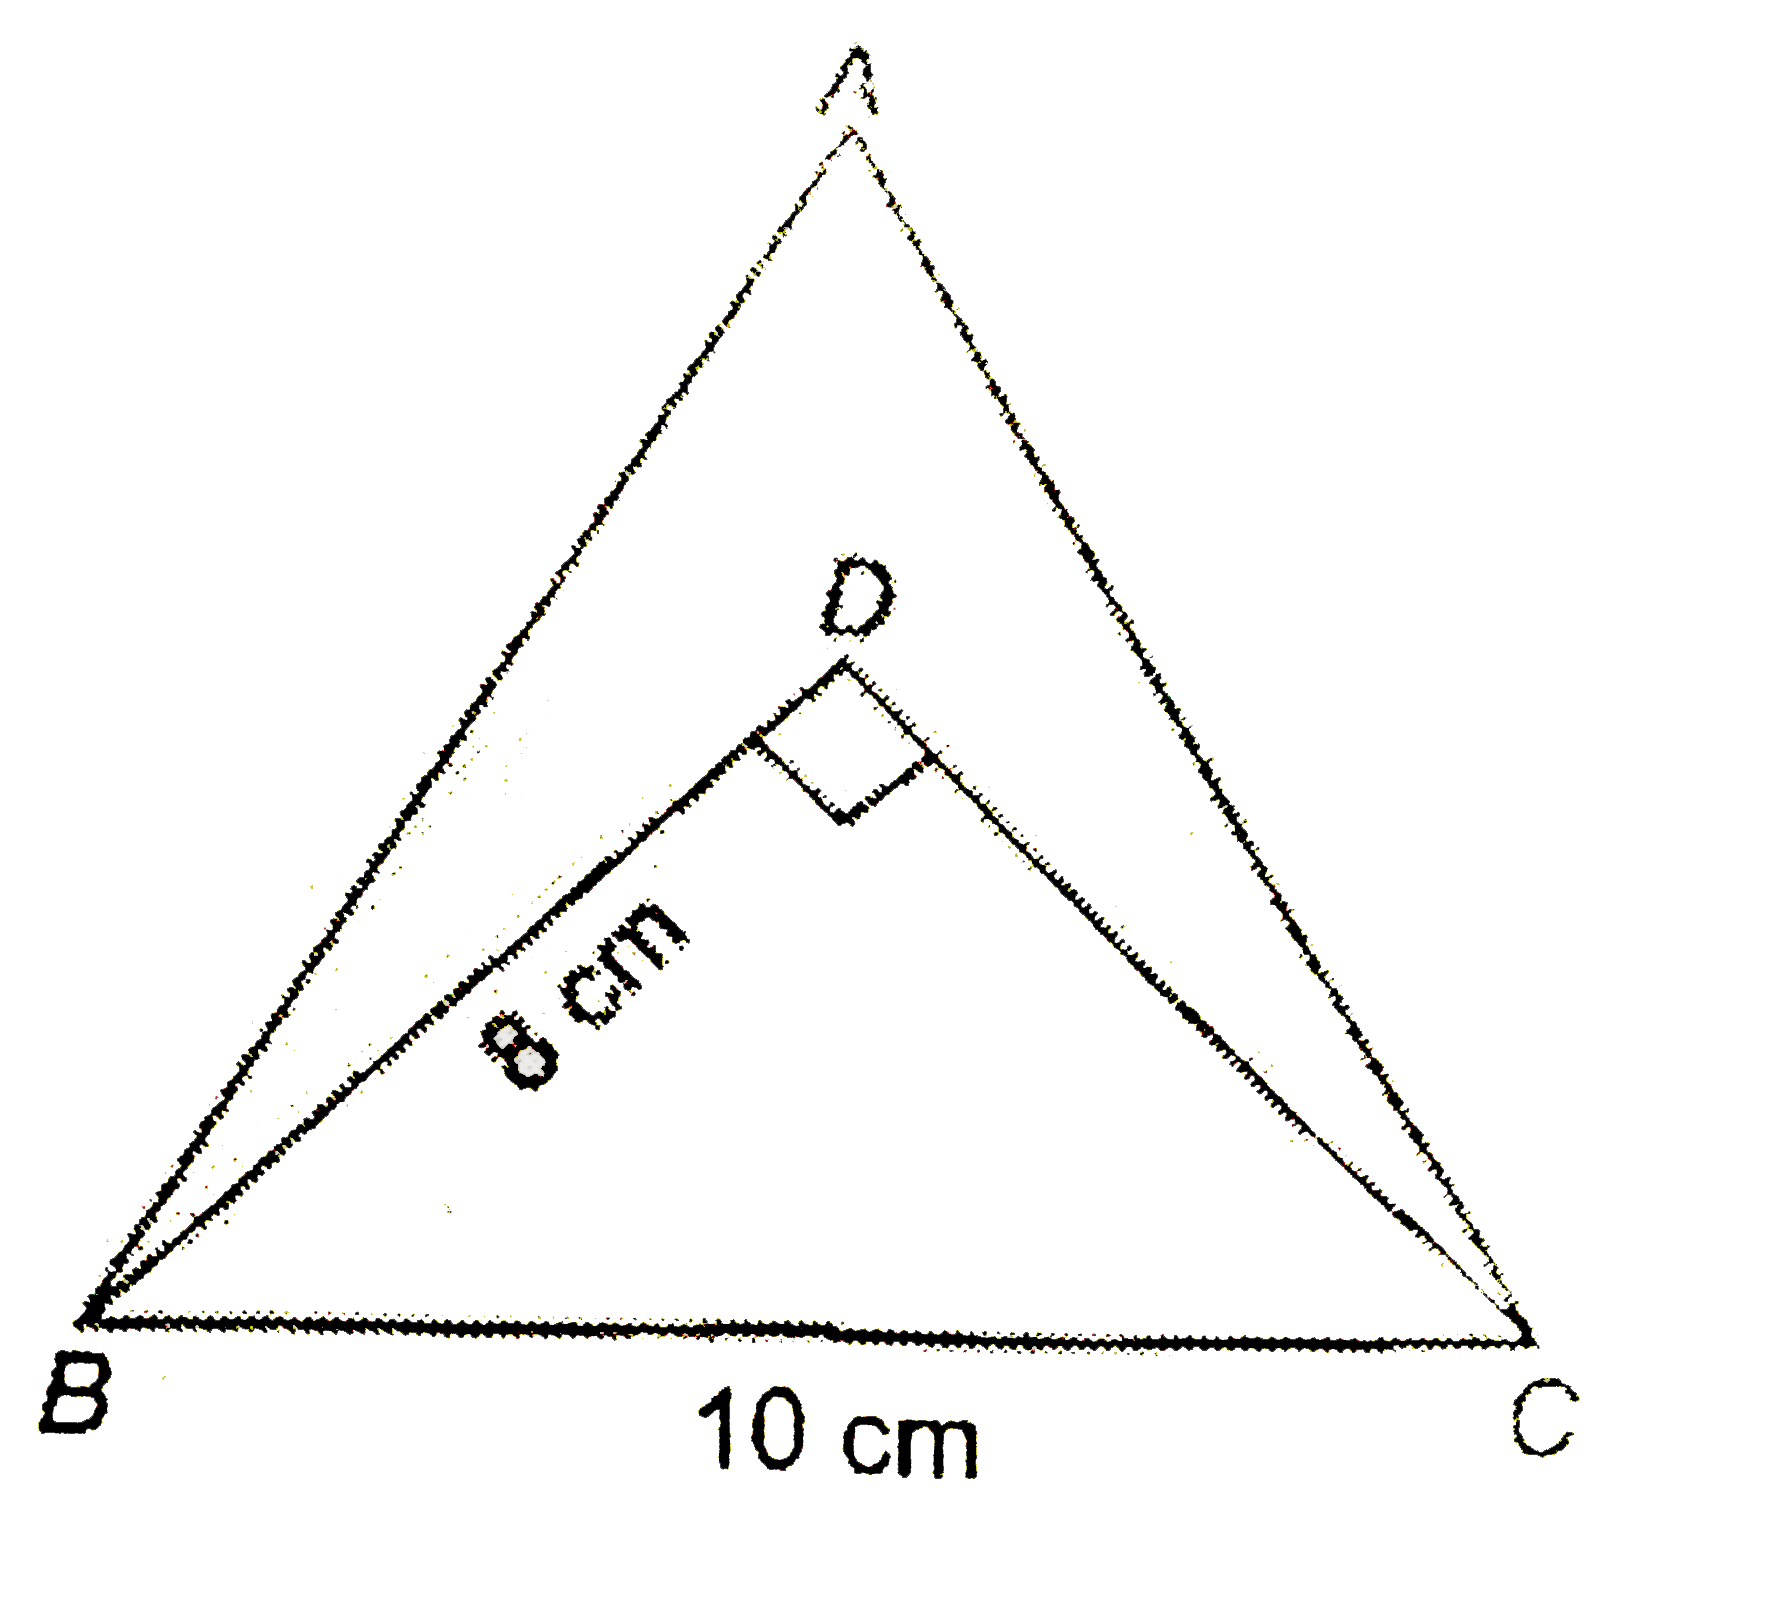 The given figure shows an equilateral  triangle  ABC whose side is 10 cm and a right-angled BDC inside it, whose side BD = 8 cm and angleD = 90^(@). Find the area of the shaded portion.